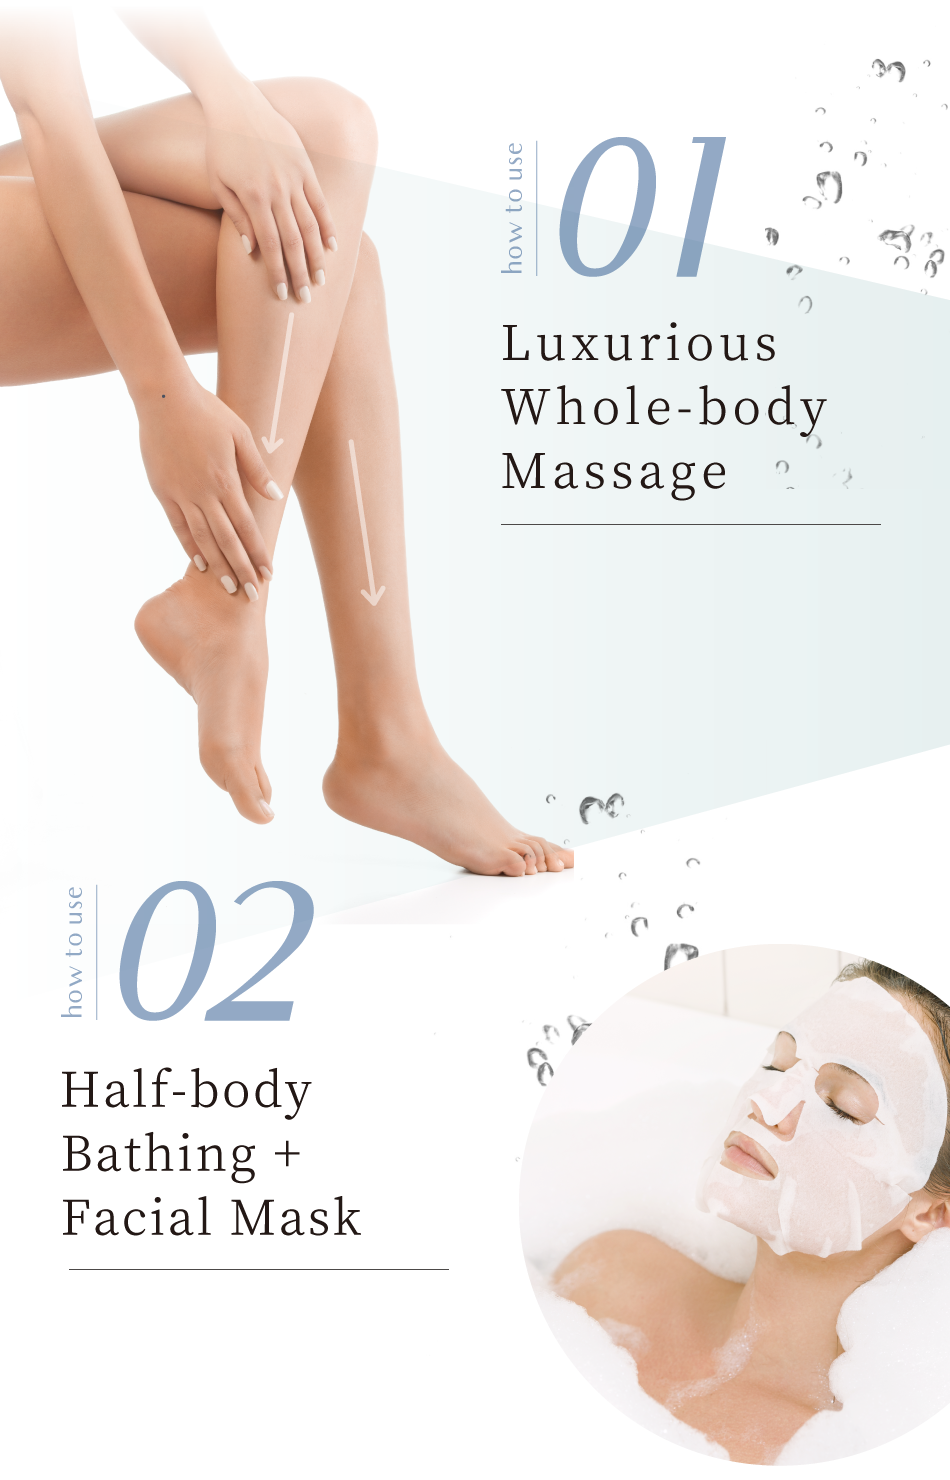 how to use 01 Luxurious Whole-body Massage how to use 02 Half-body Bathing + Facial Mask